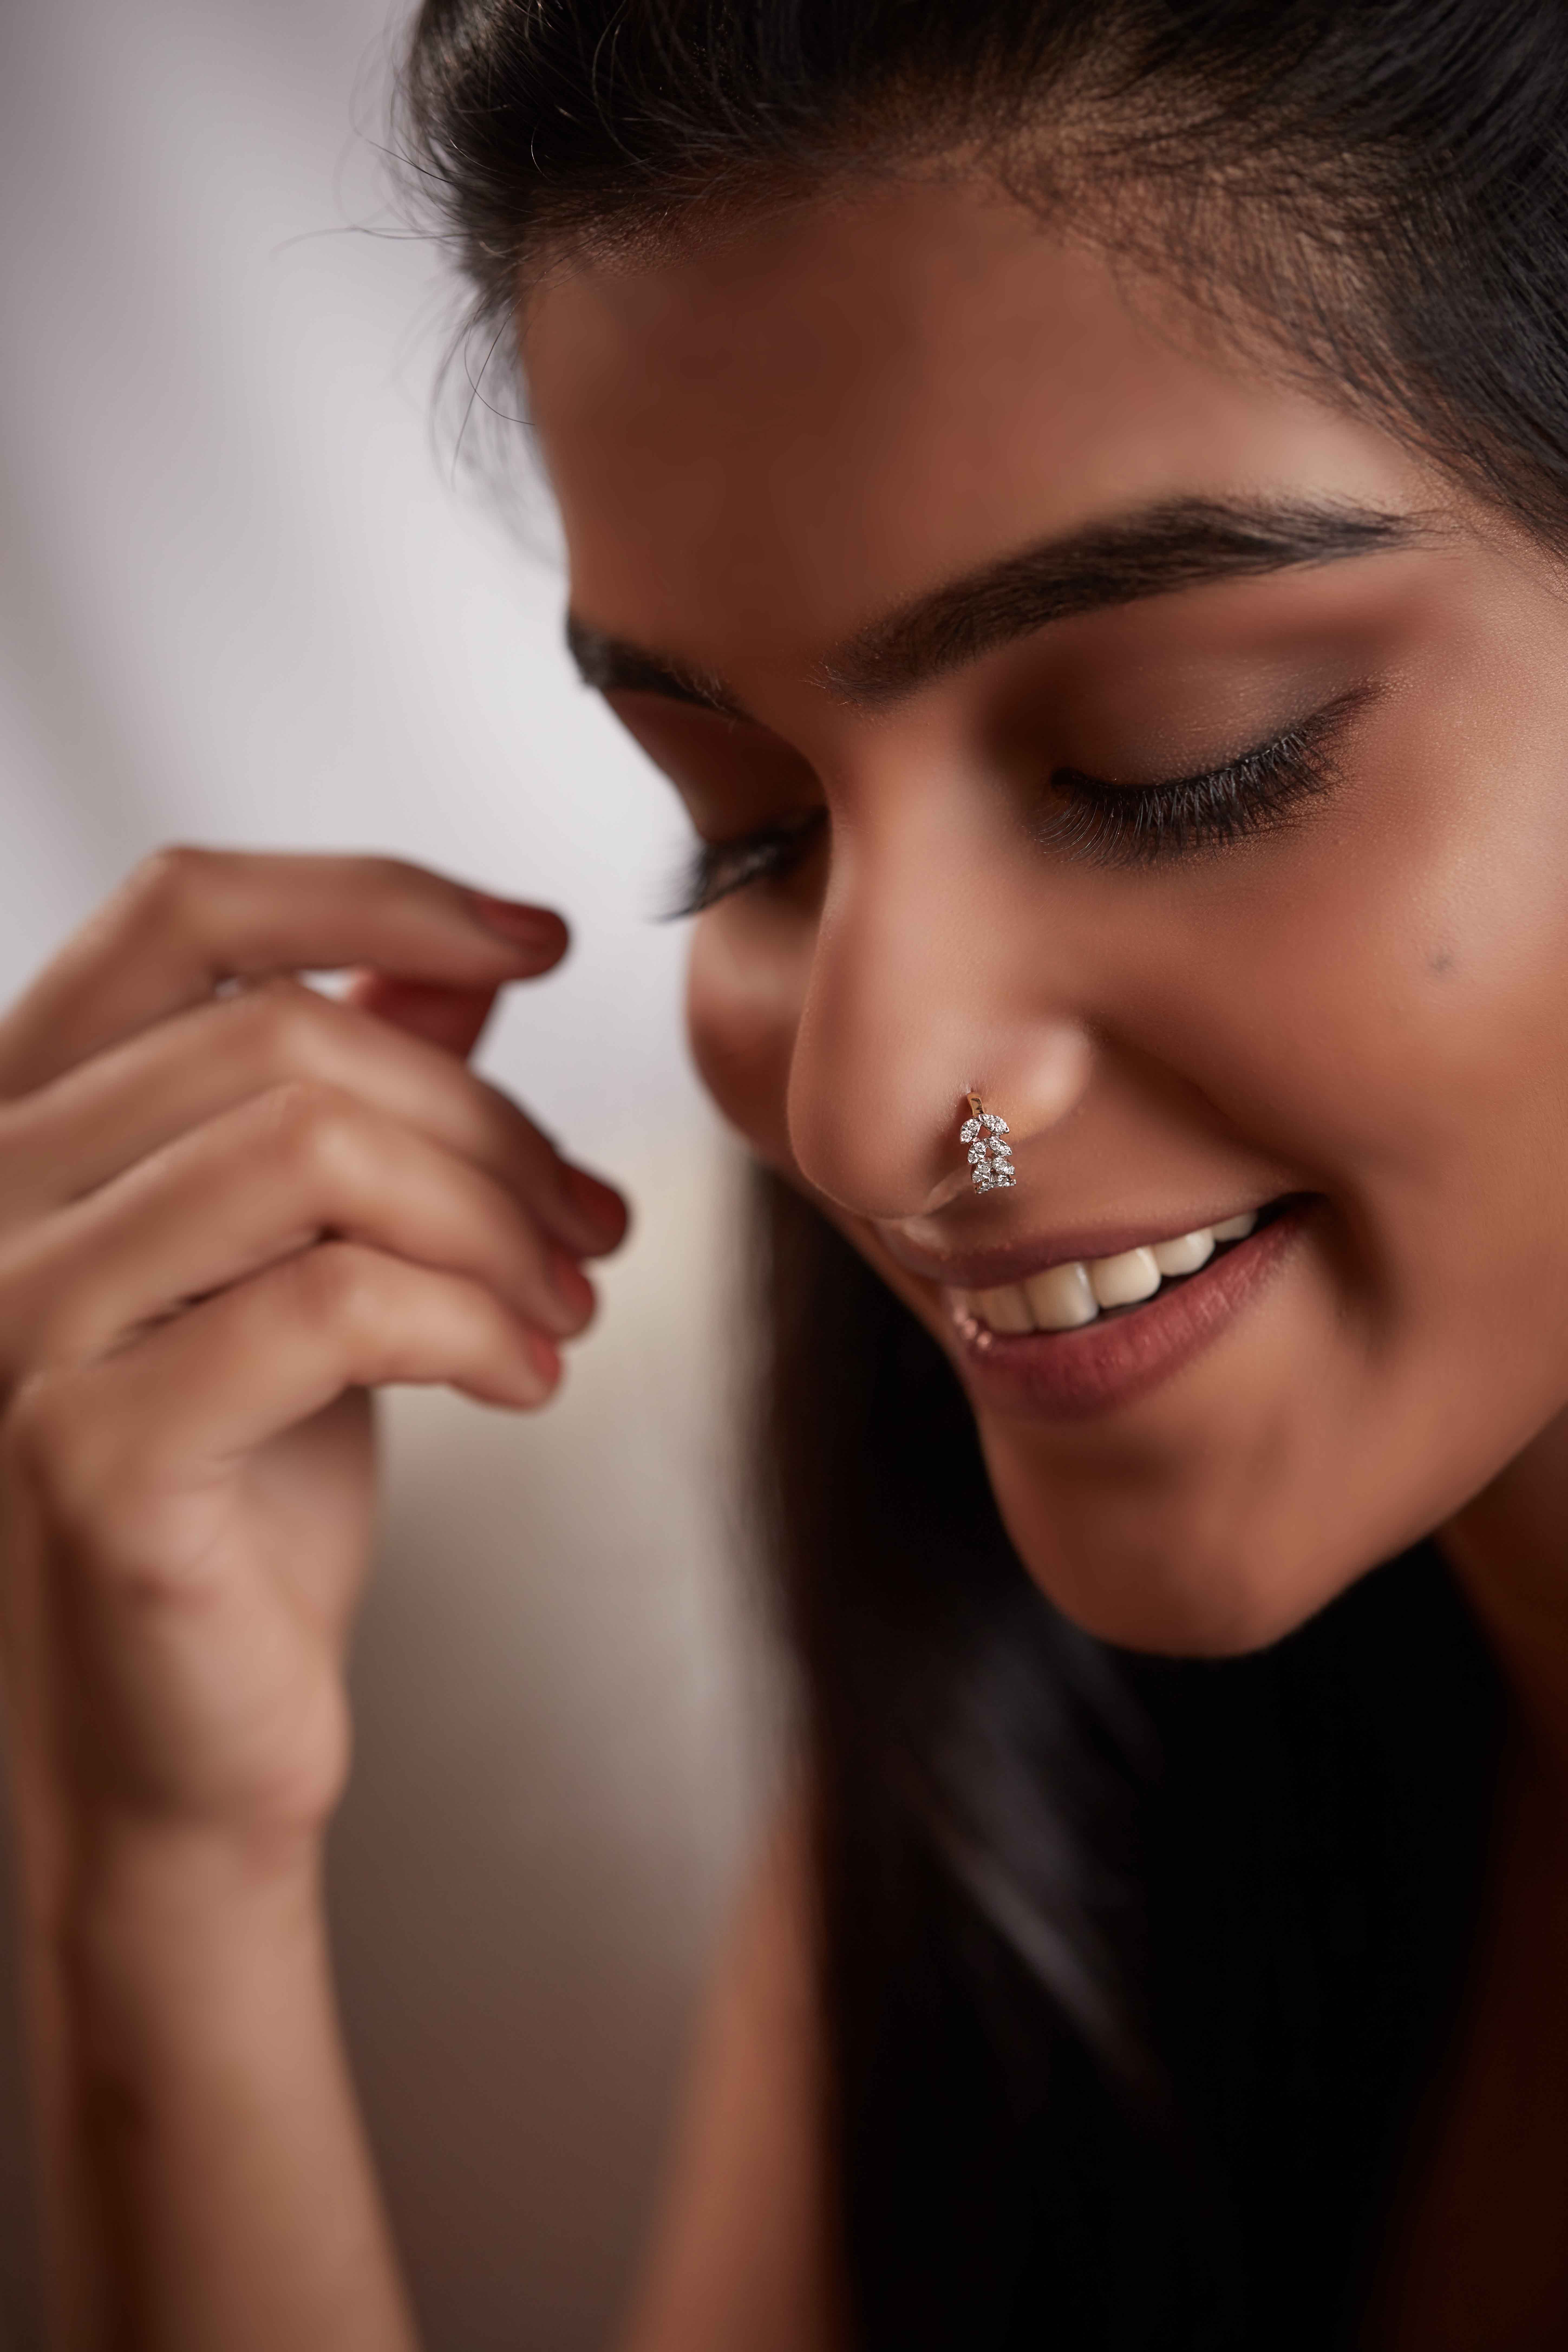 Buy Abhika Creations Golden Flower Nath With White Pearl Hair Chain  Handmade Indian Fashion Jewelry Nath Designer Nose Ring Latest Nathiya Nose  Ring Design Nose Jewelry For Women Indian Wedding Nose Pin